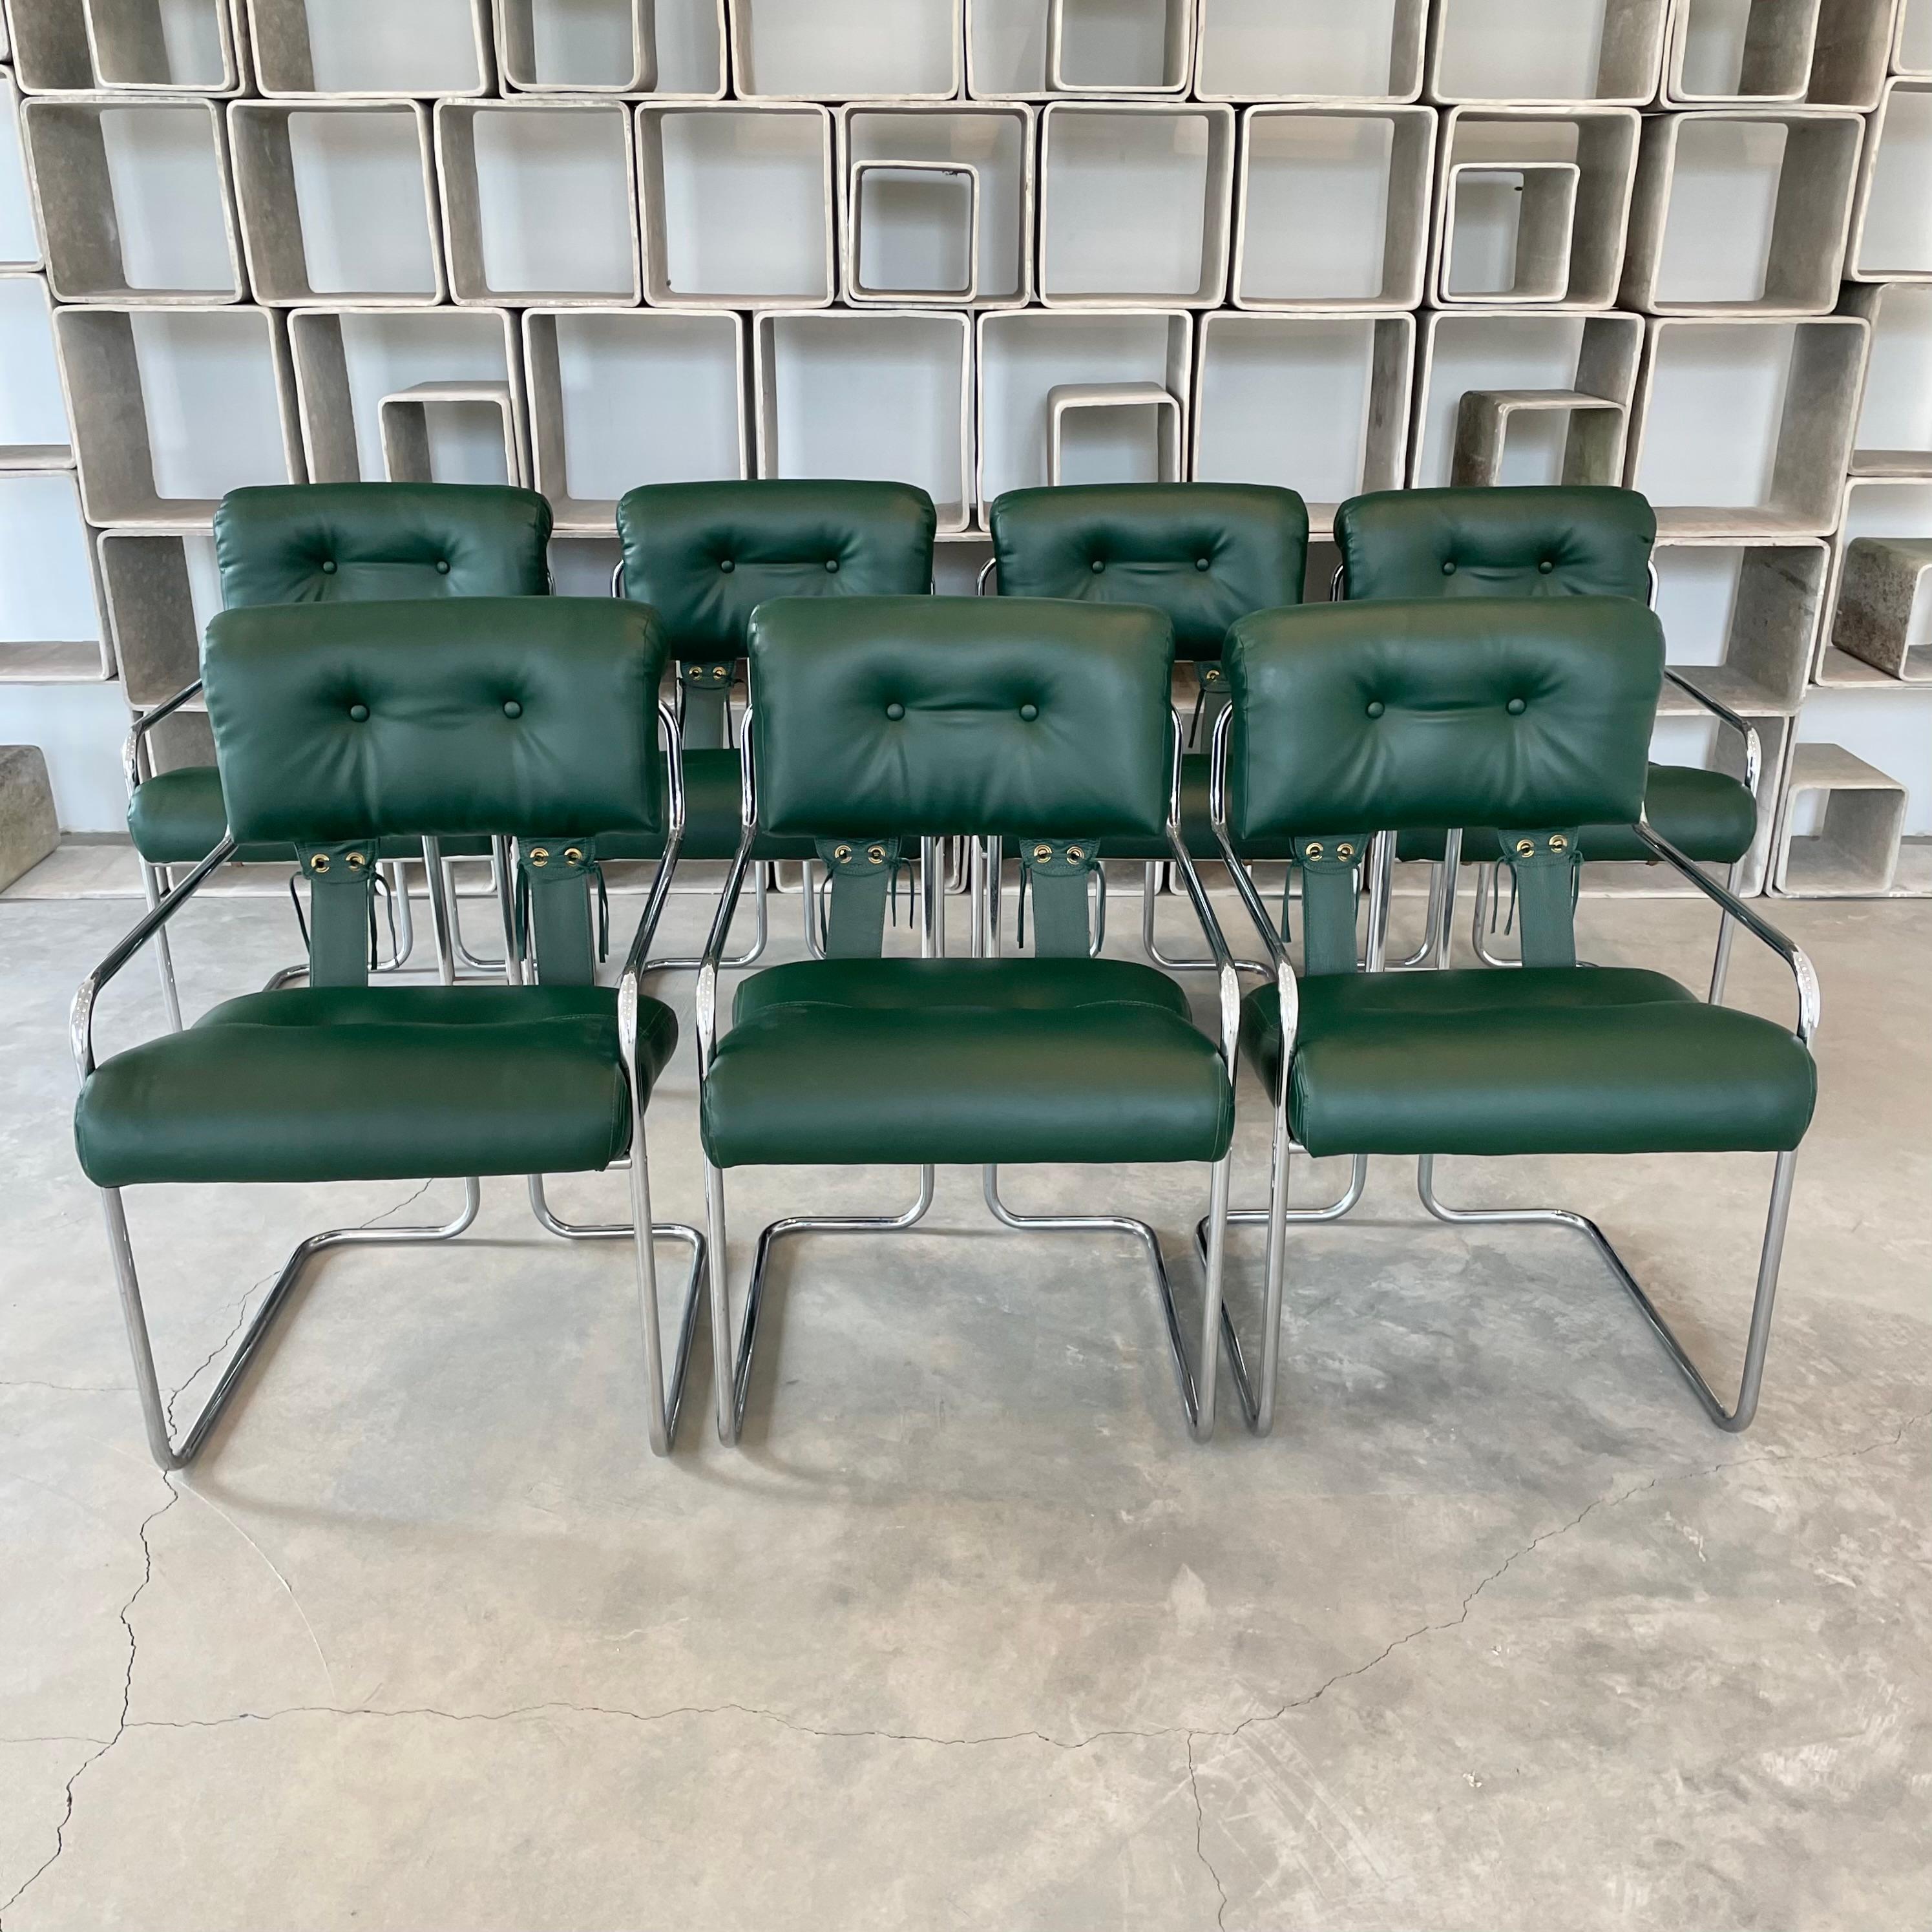 Stunning set of 7 Tucroma chairs by Guido Faleschini for Mariani, Pace. Chairs fully reupholstered in an emerald green vegan leather. Great condition to chrome and leather. Priced as a set of 7. 